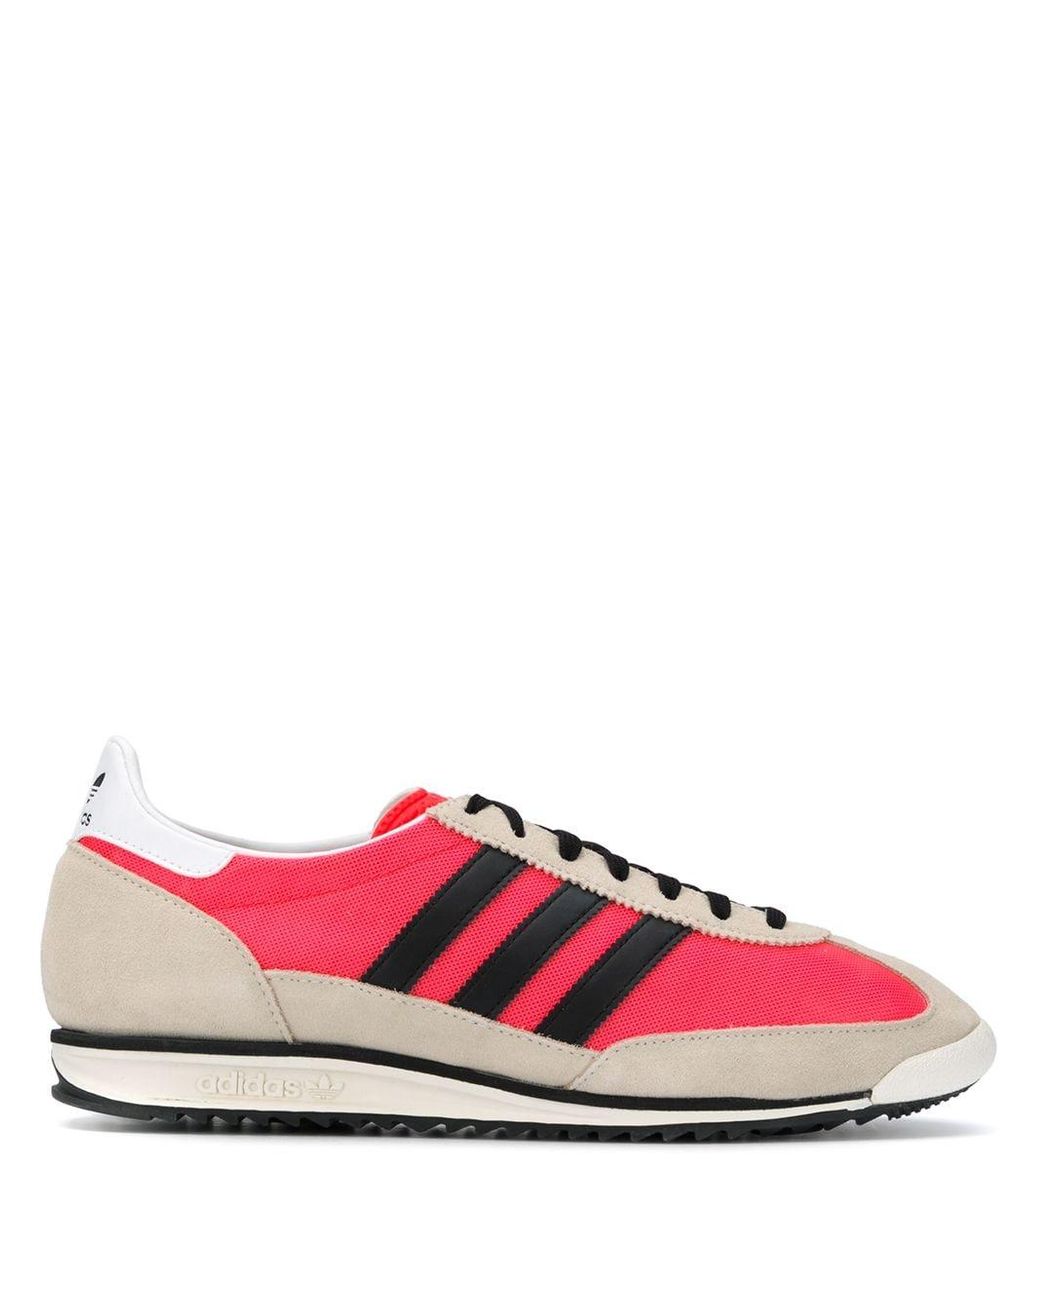 adidas Rubber Sl 71 Low-top Trainers in 